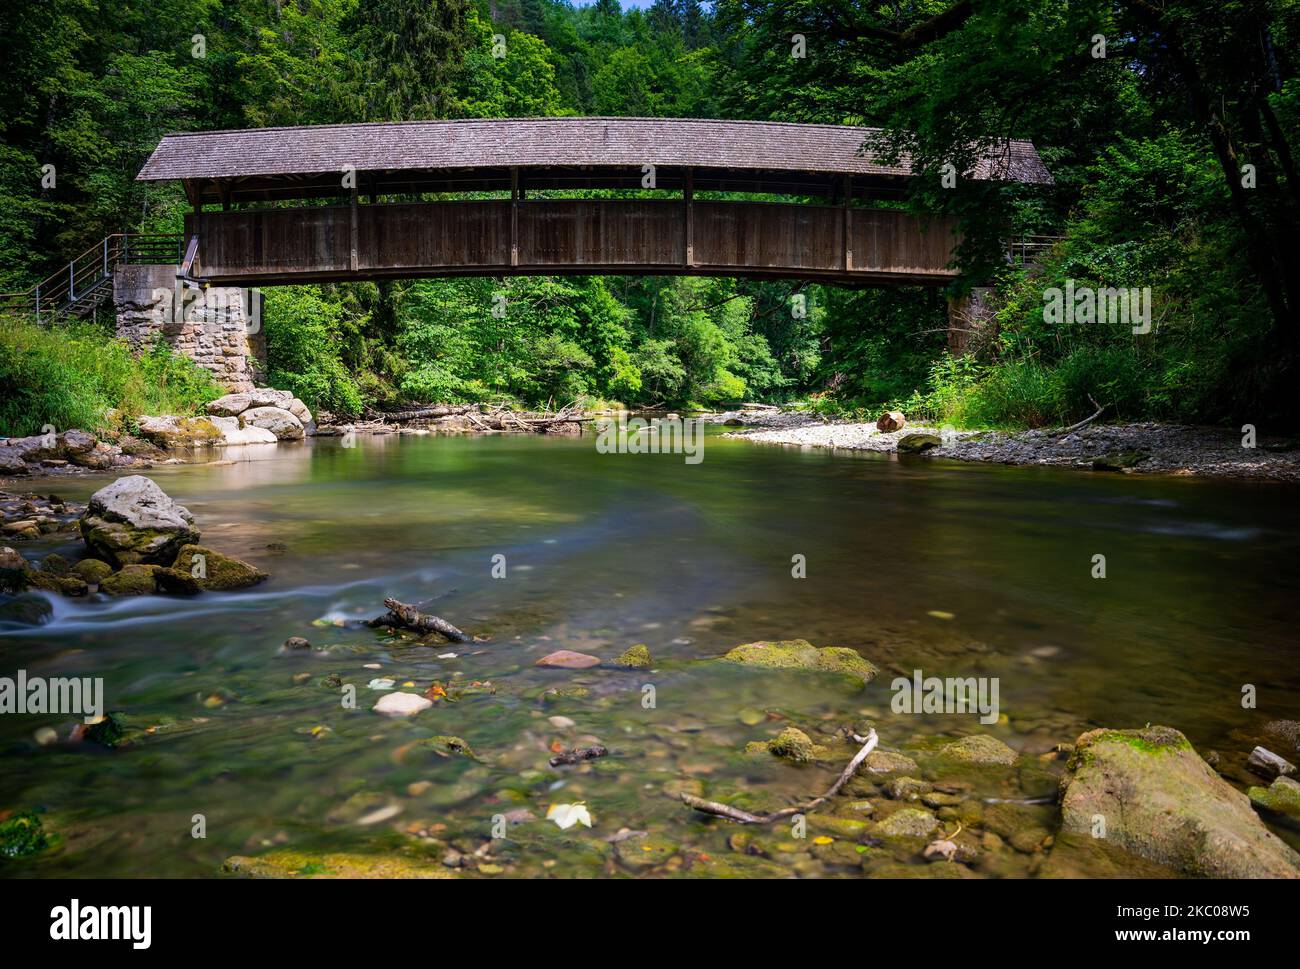 A flowing rocky river surrounded by dense trees and building Stock Photo